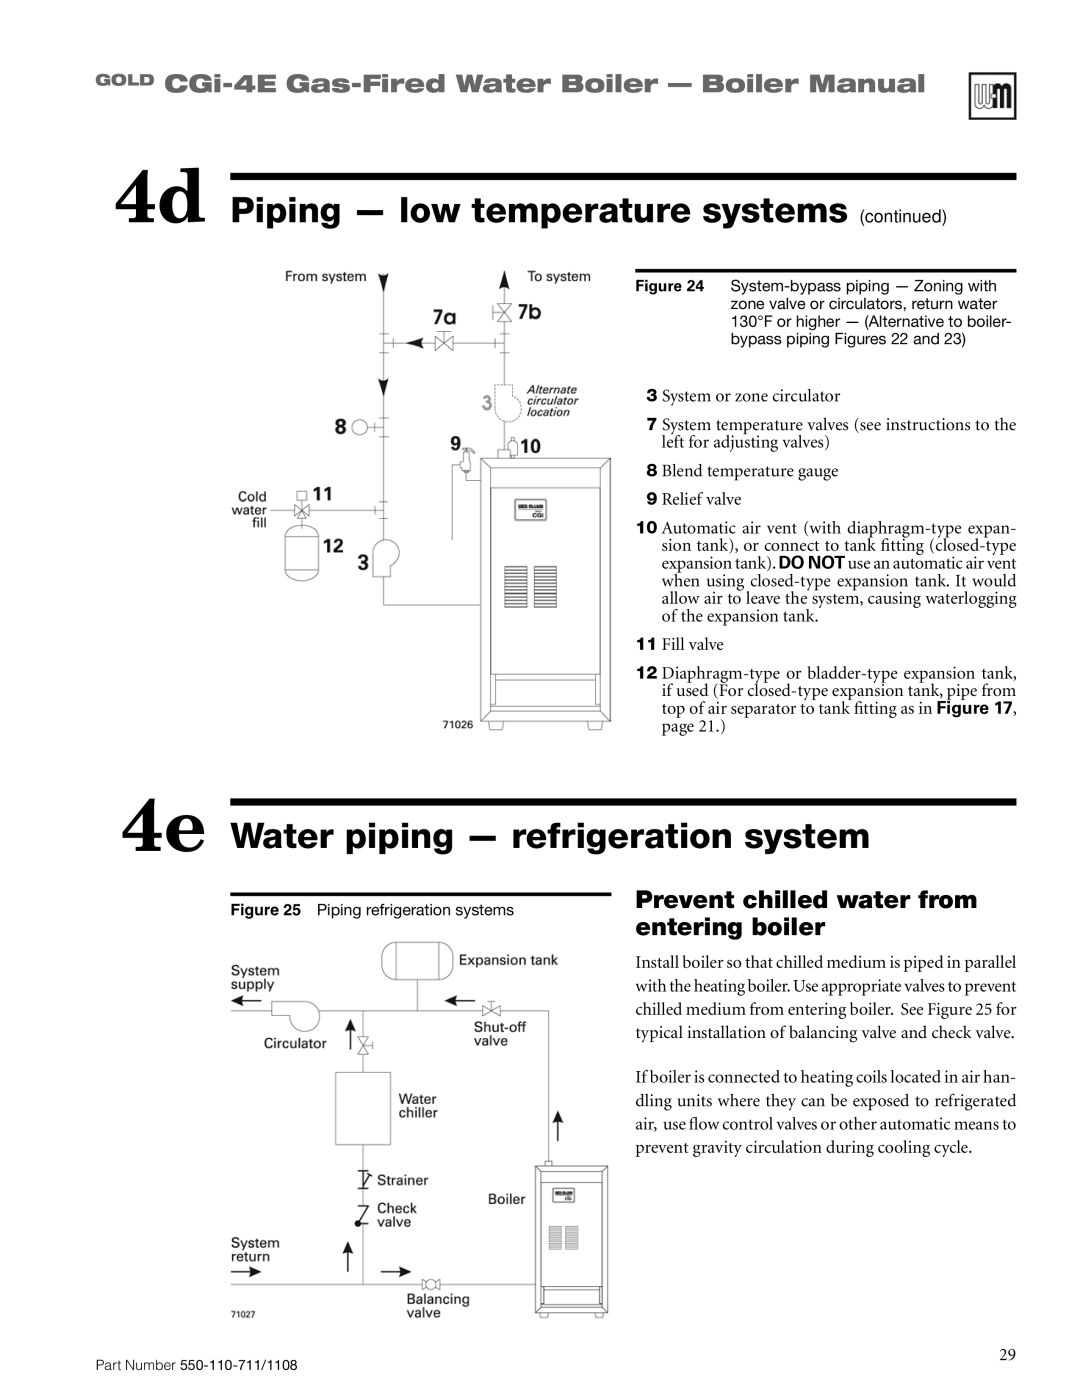 Weil-McLain CGI-4E manual 4e Water piping - refrigeration system, 4d Piping - low temperature systems continued 